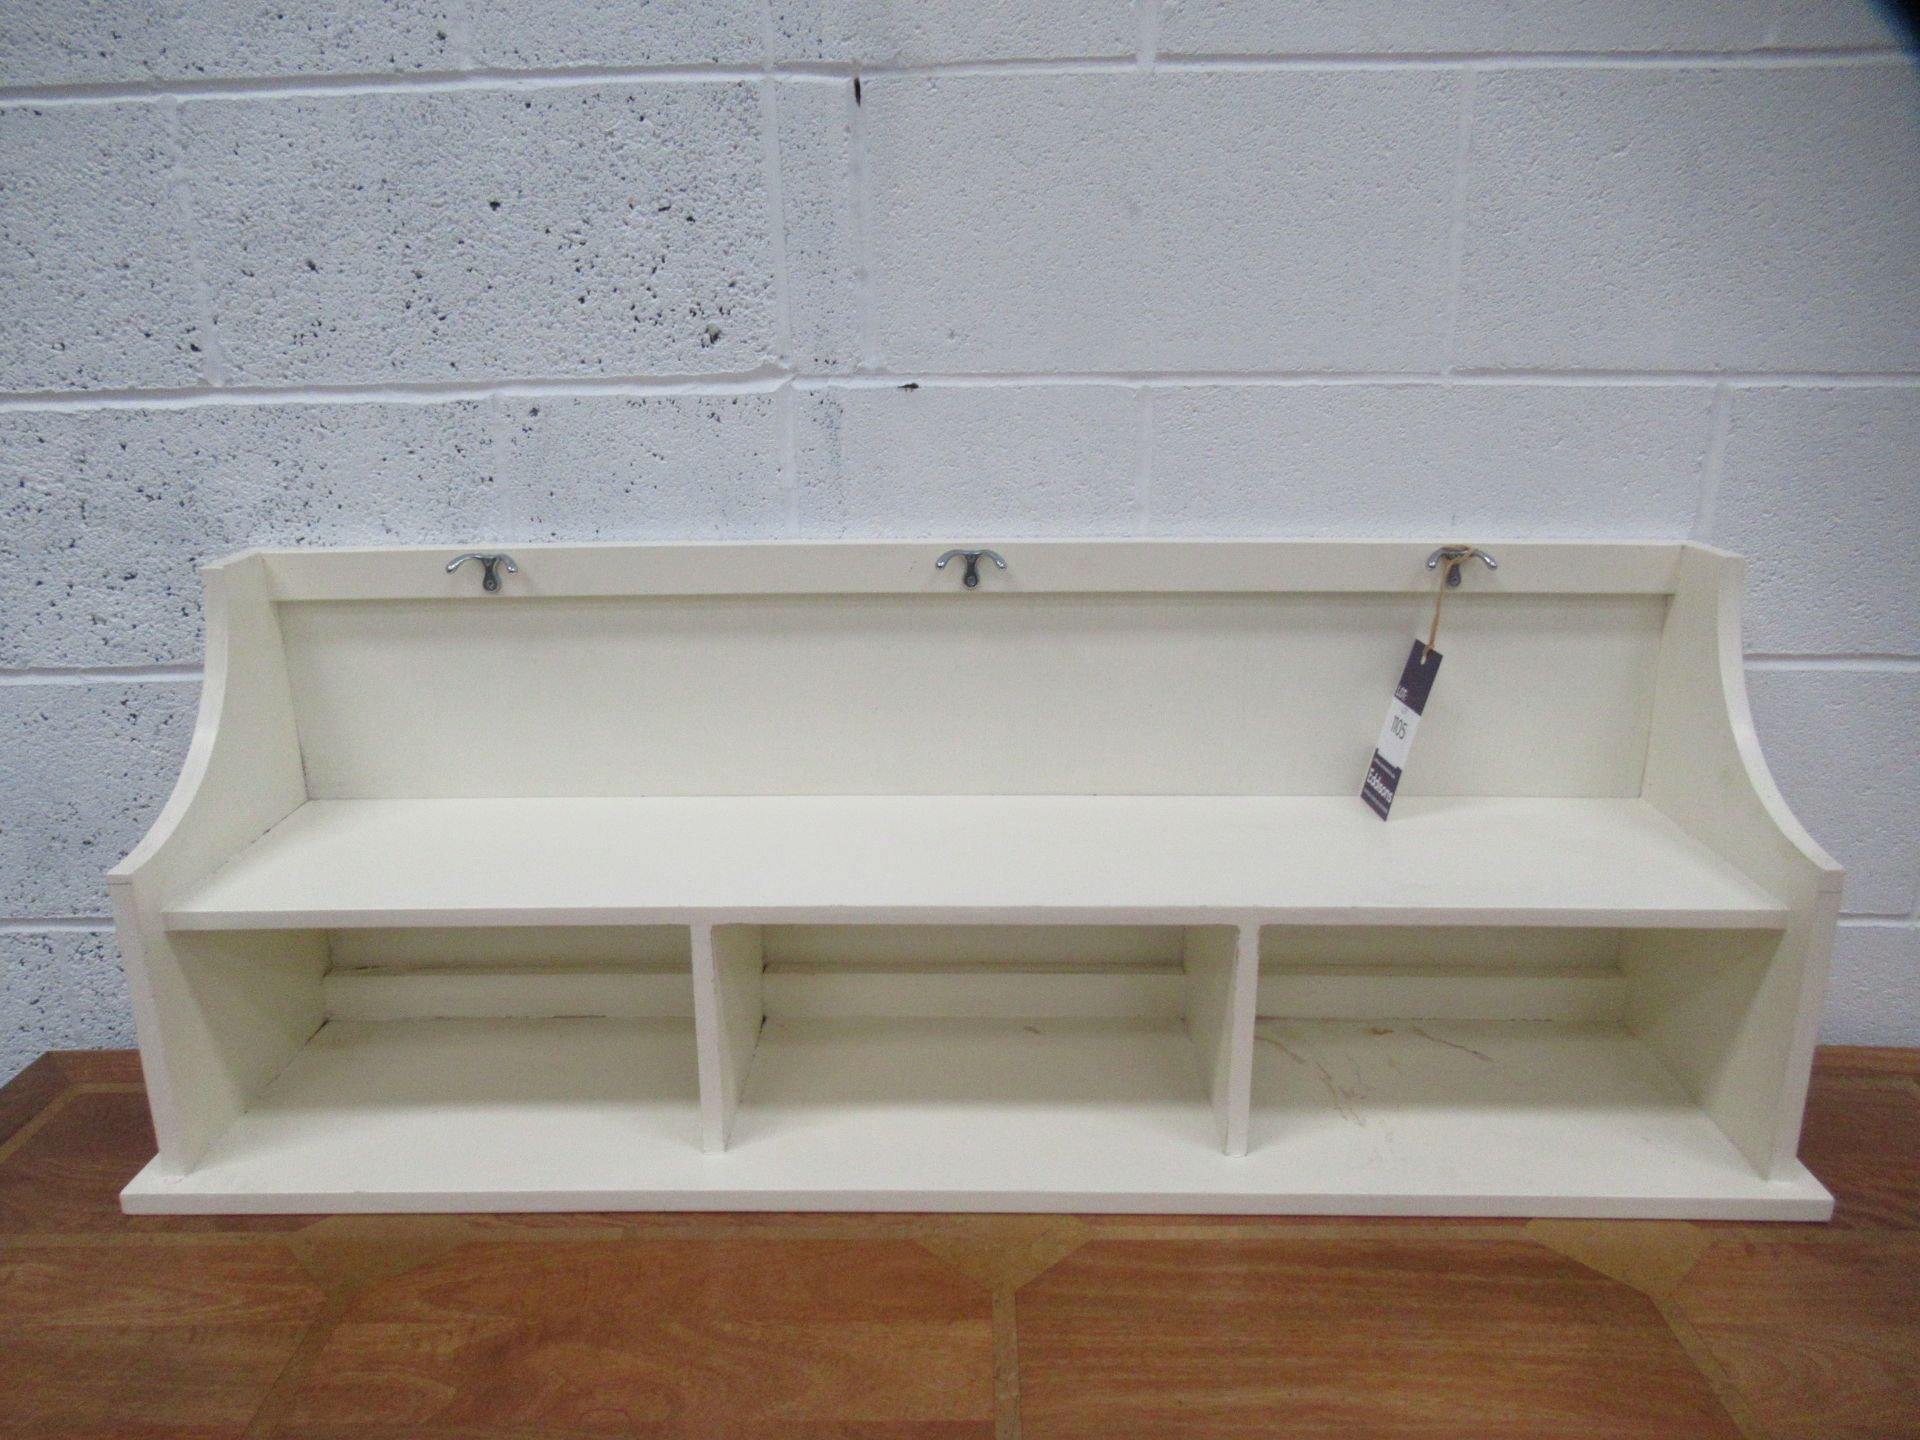 Three Section Painted Mountable Storage Unit with Three Coat Hooks (120cm wide)